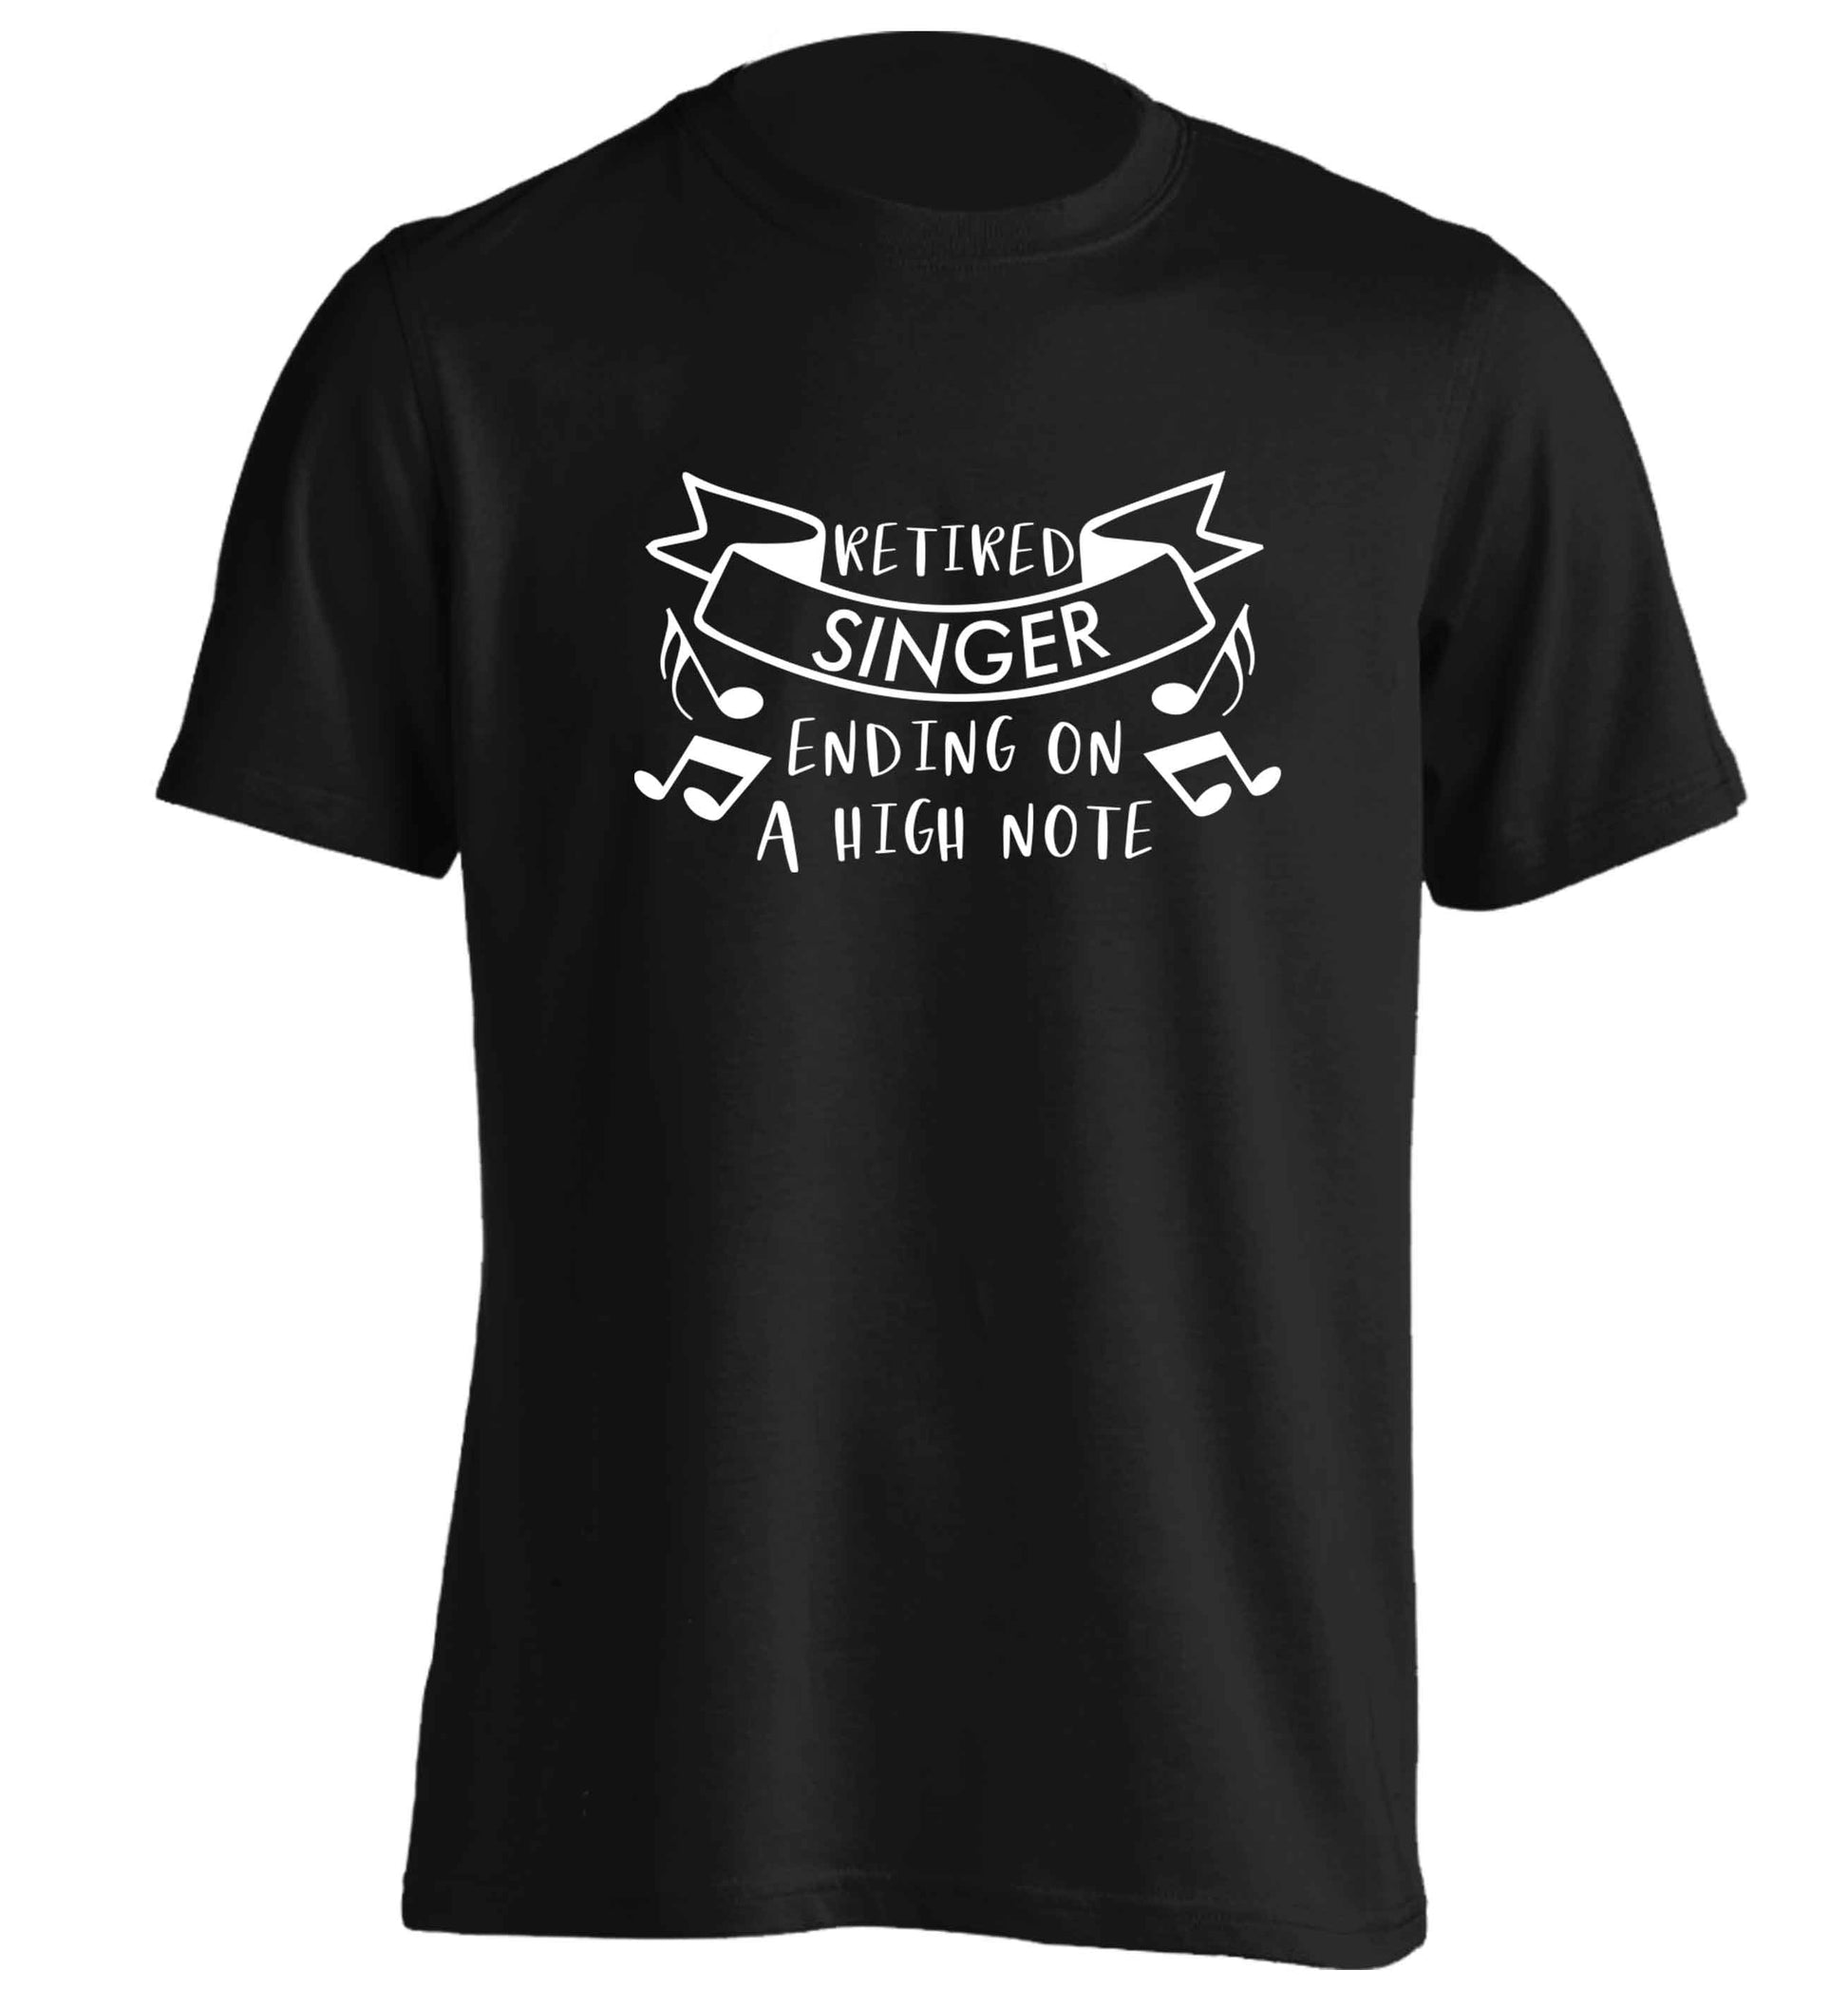 Retired singer ending on a high note adults unisex black Tshirt 2XL